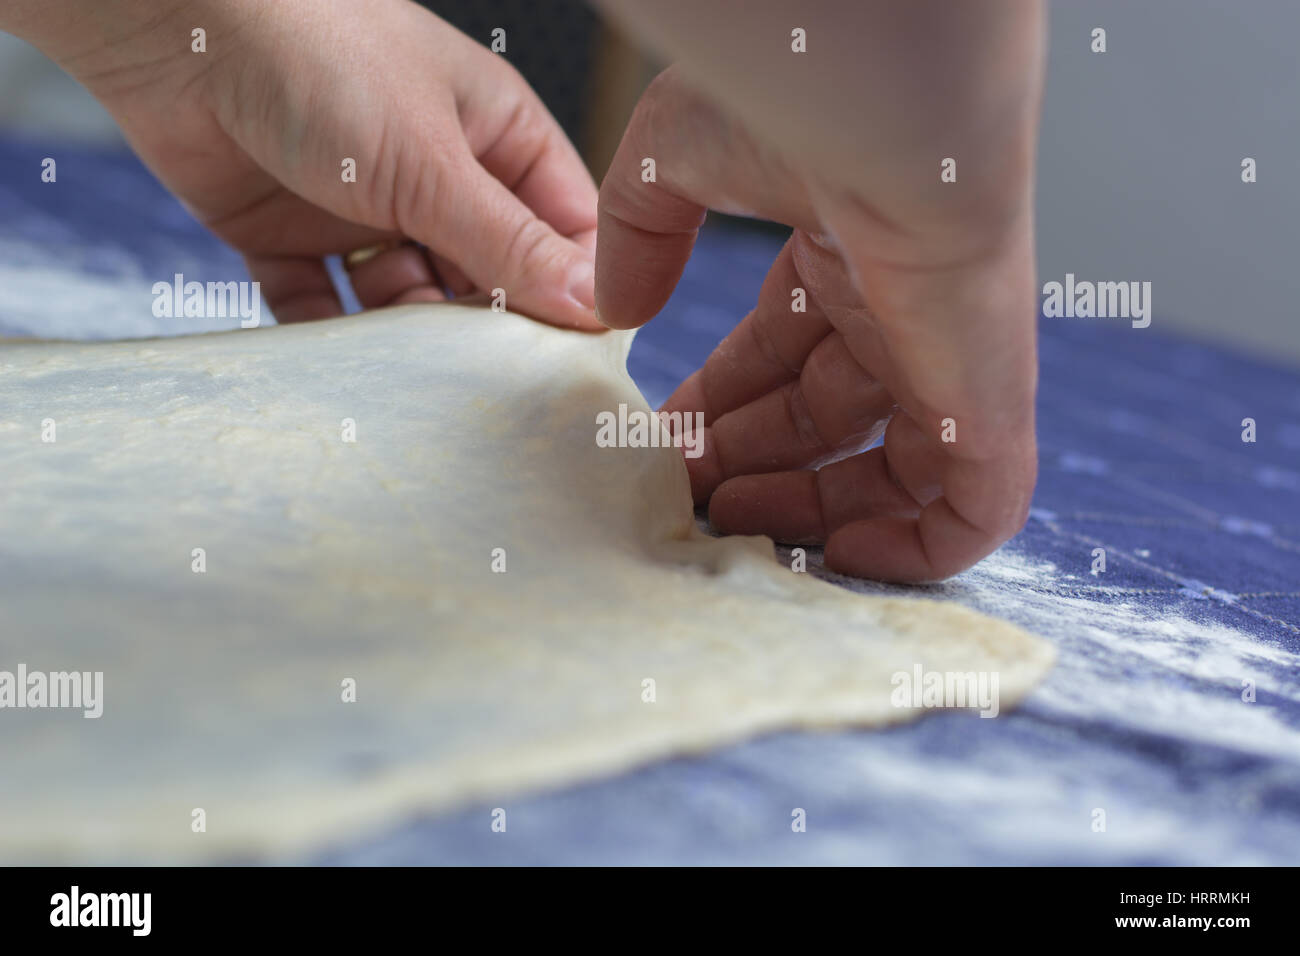 Creating homemade Phyllo or strudel dough on a home table cloth for cheese pie or other kind of traditional pastry. Stock Photo